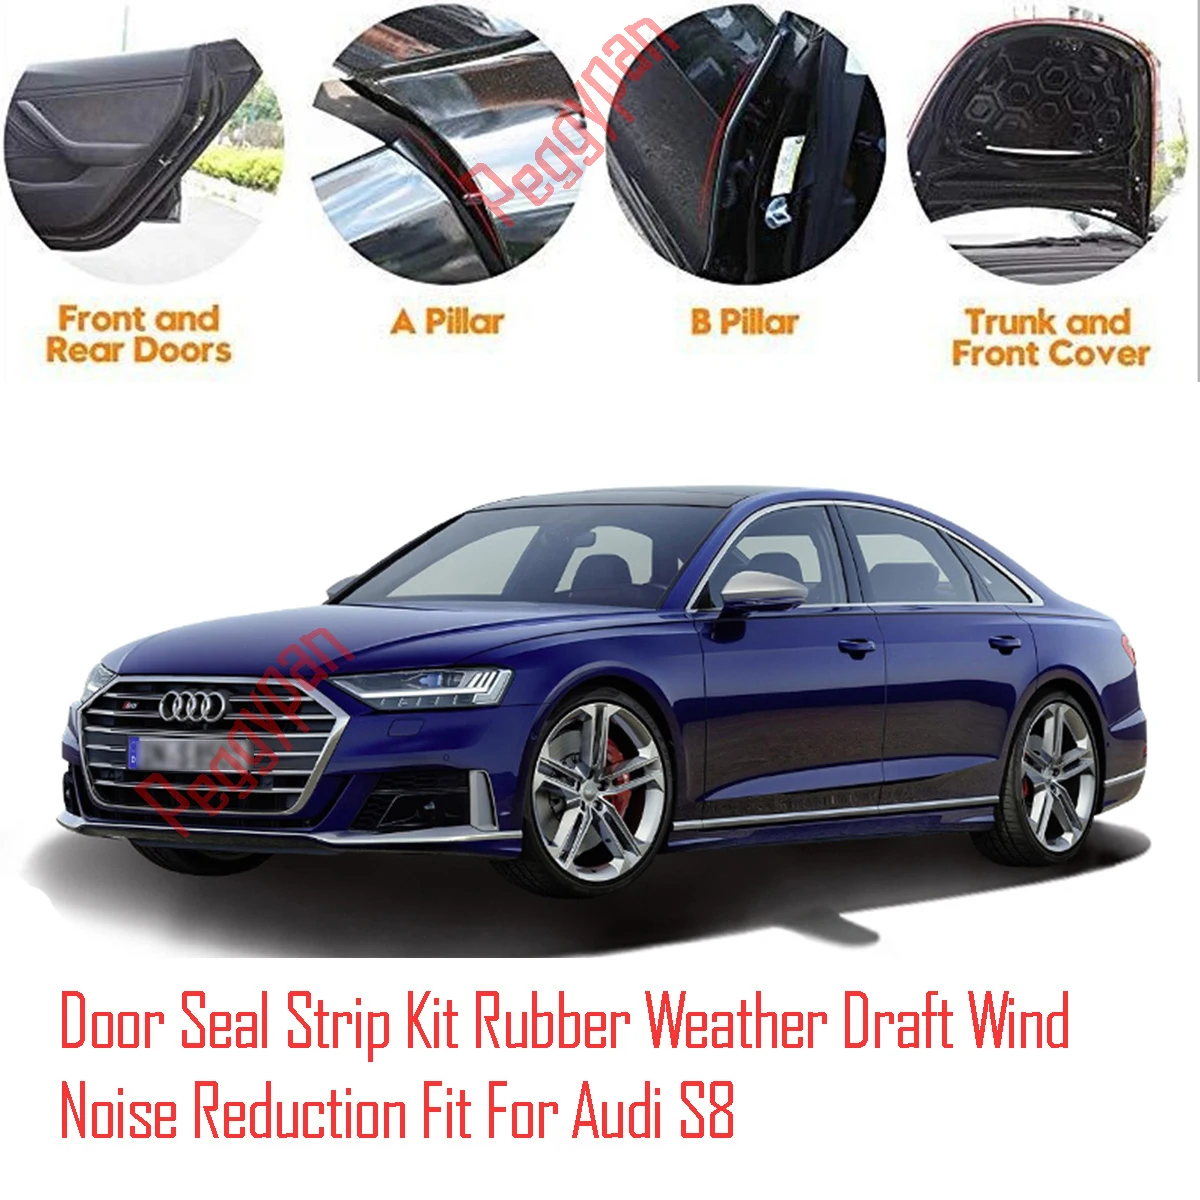 Door Seal Strip Kit Self Adhesive Window Engine Cover Soundproof Rubber Weather Draft Wind Noise Reduction Fit For Audi S8